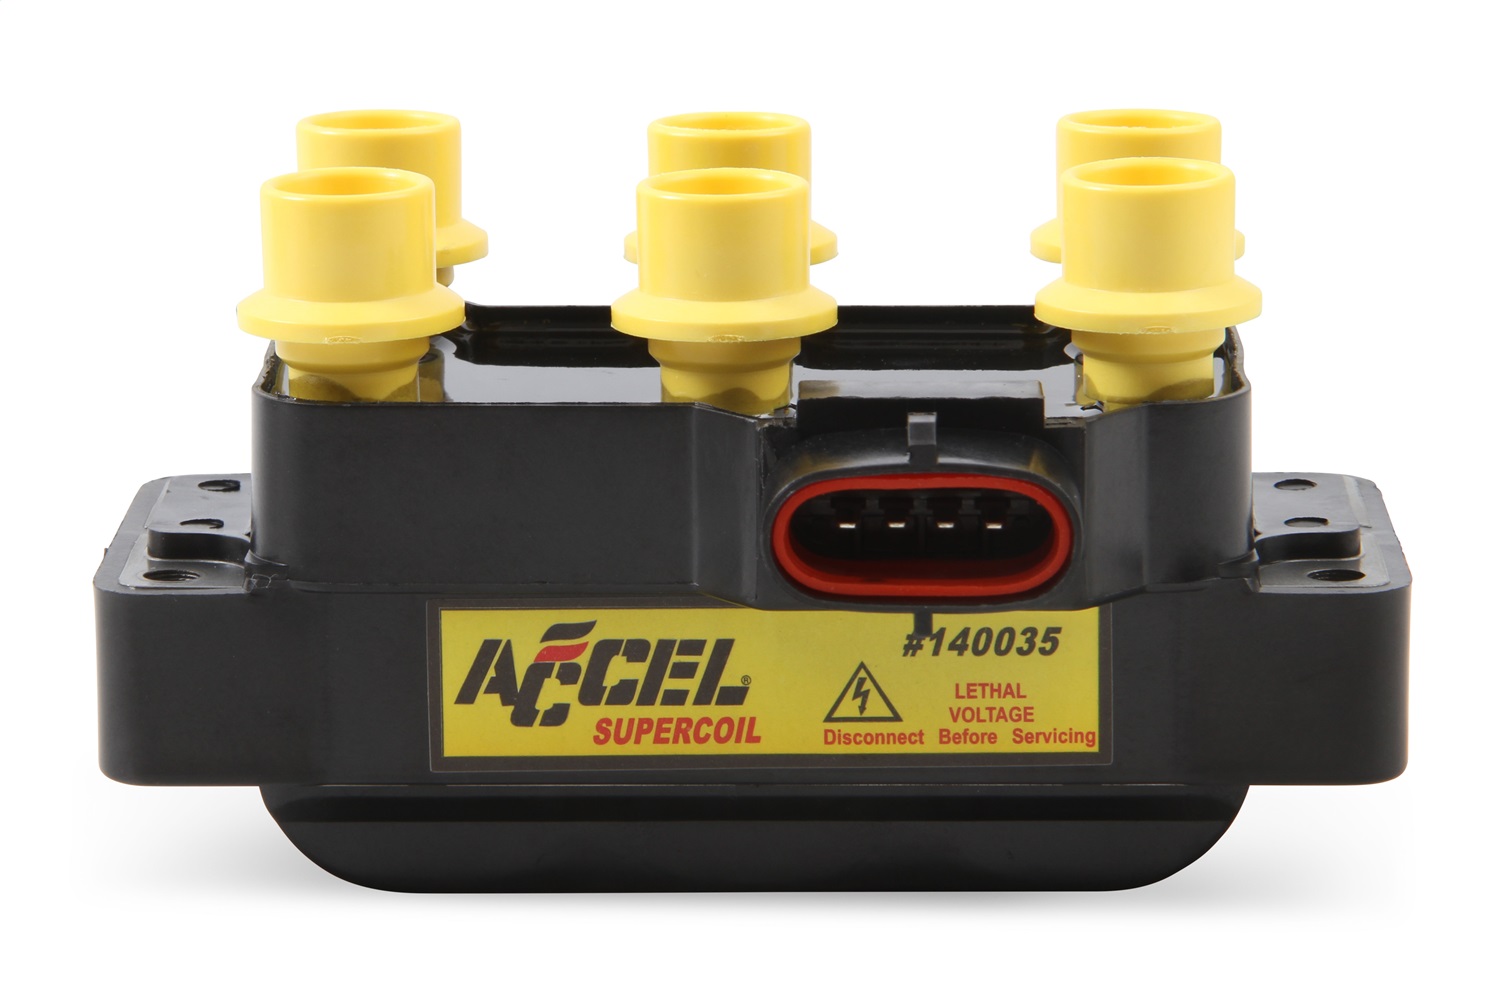 Accell 140035 SuperCoil Ignition Coil